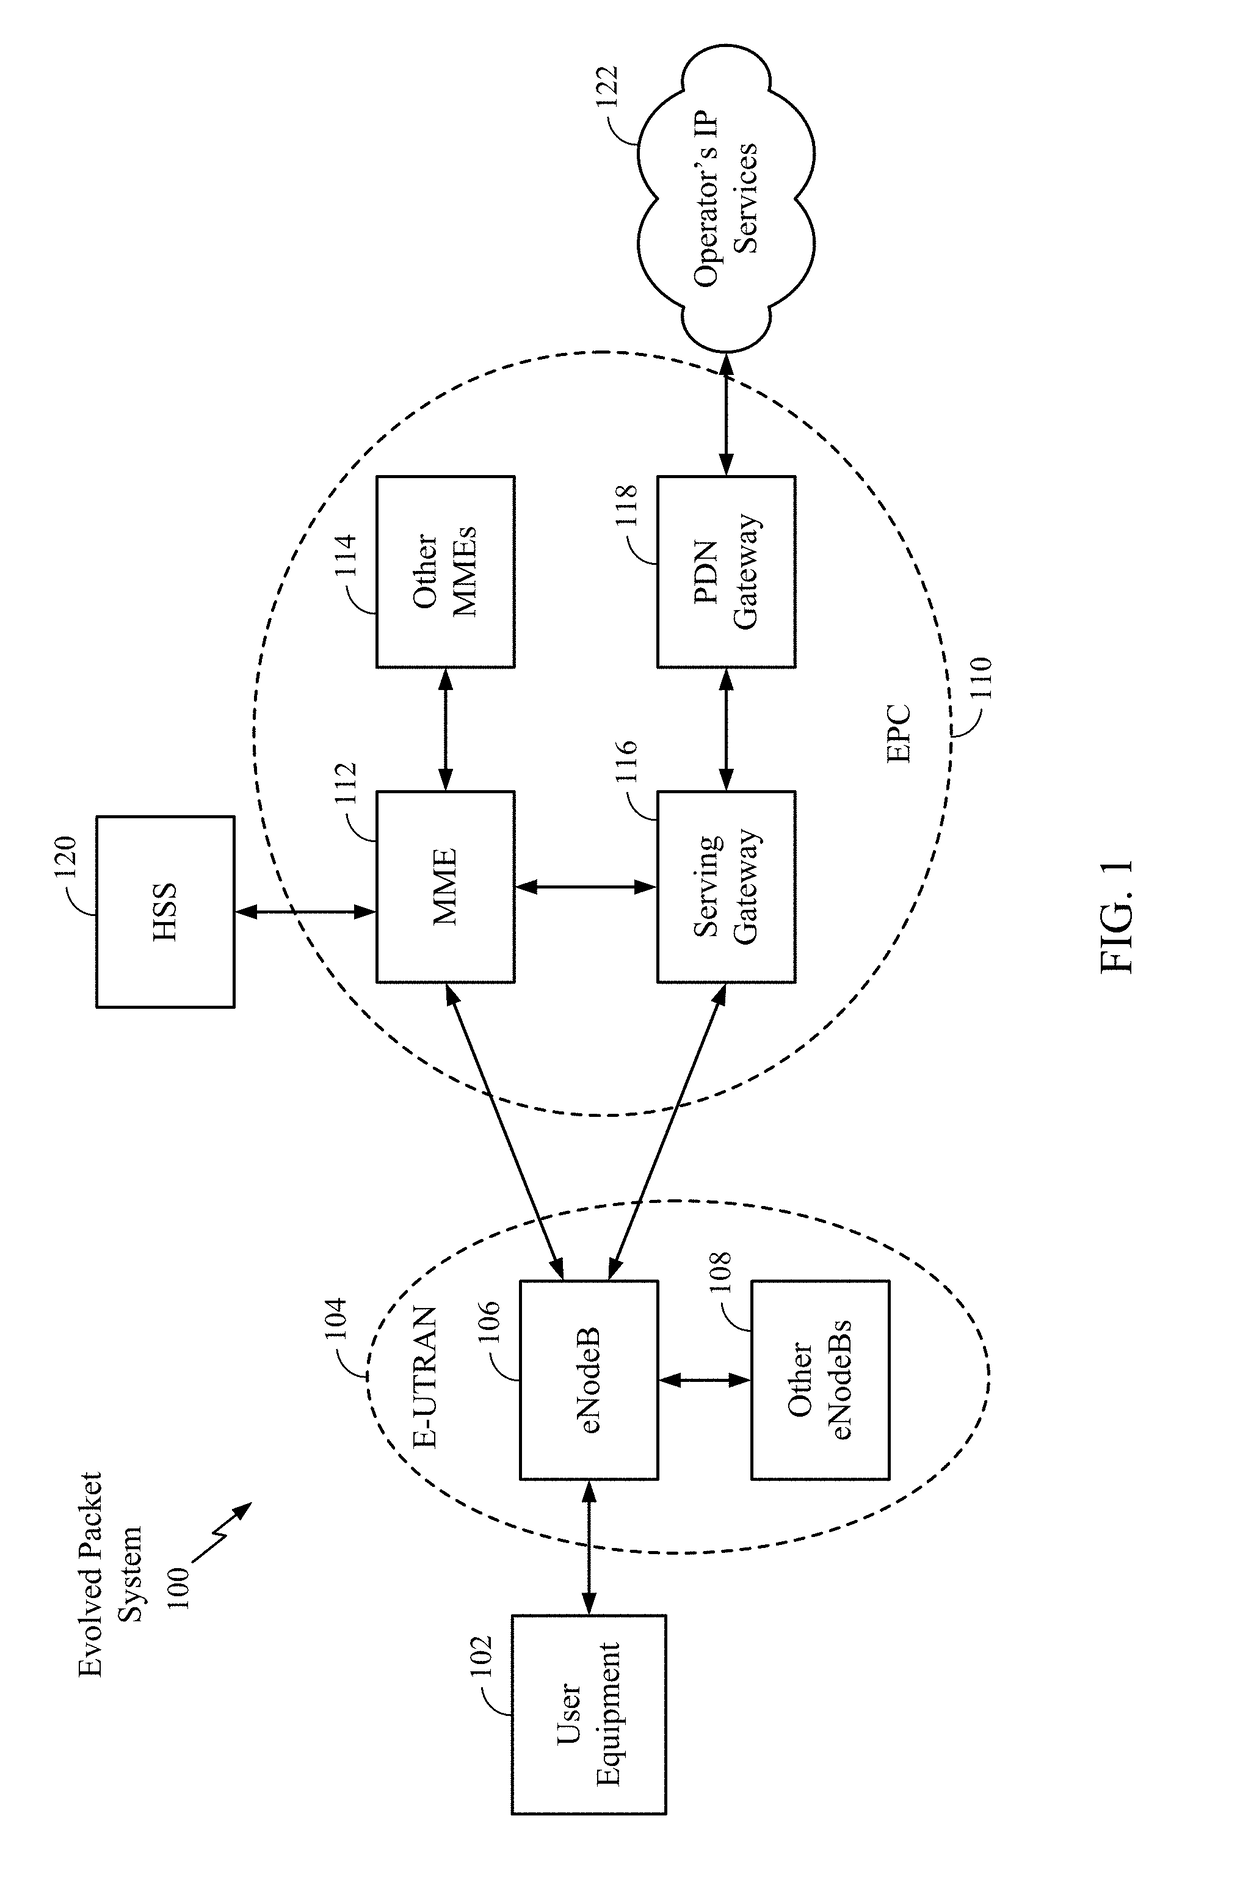 Channel assignment in shared spectrum based on network coverage overlap and network weights